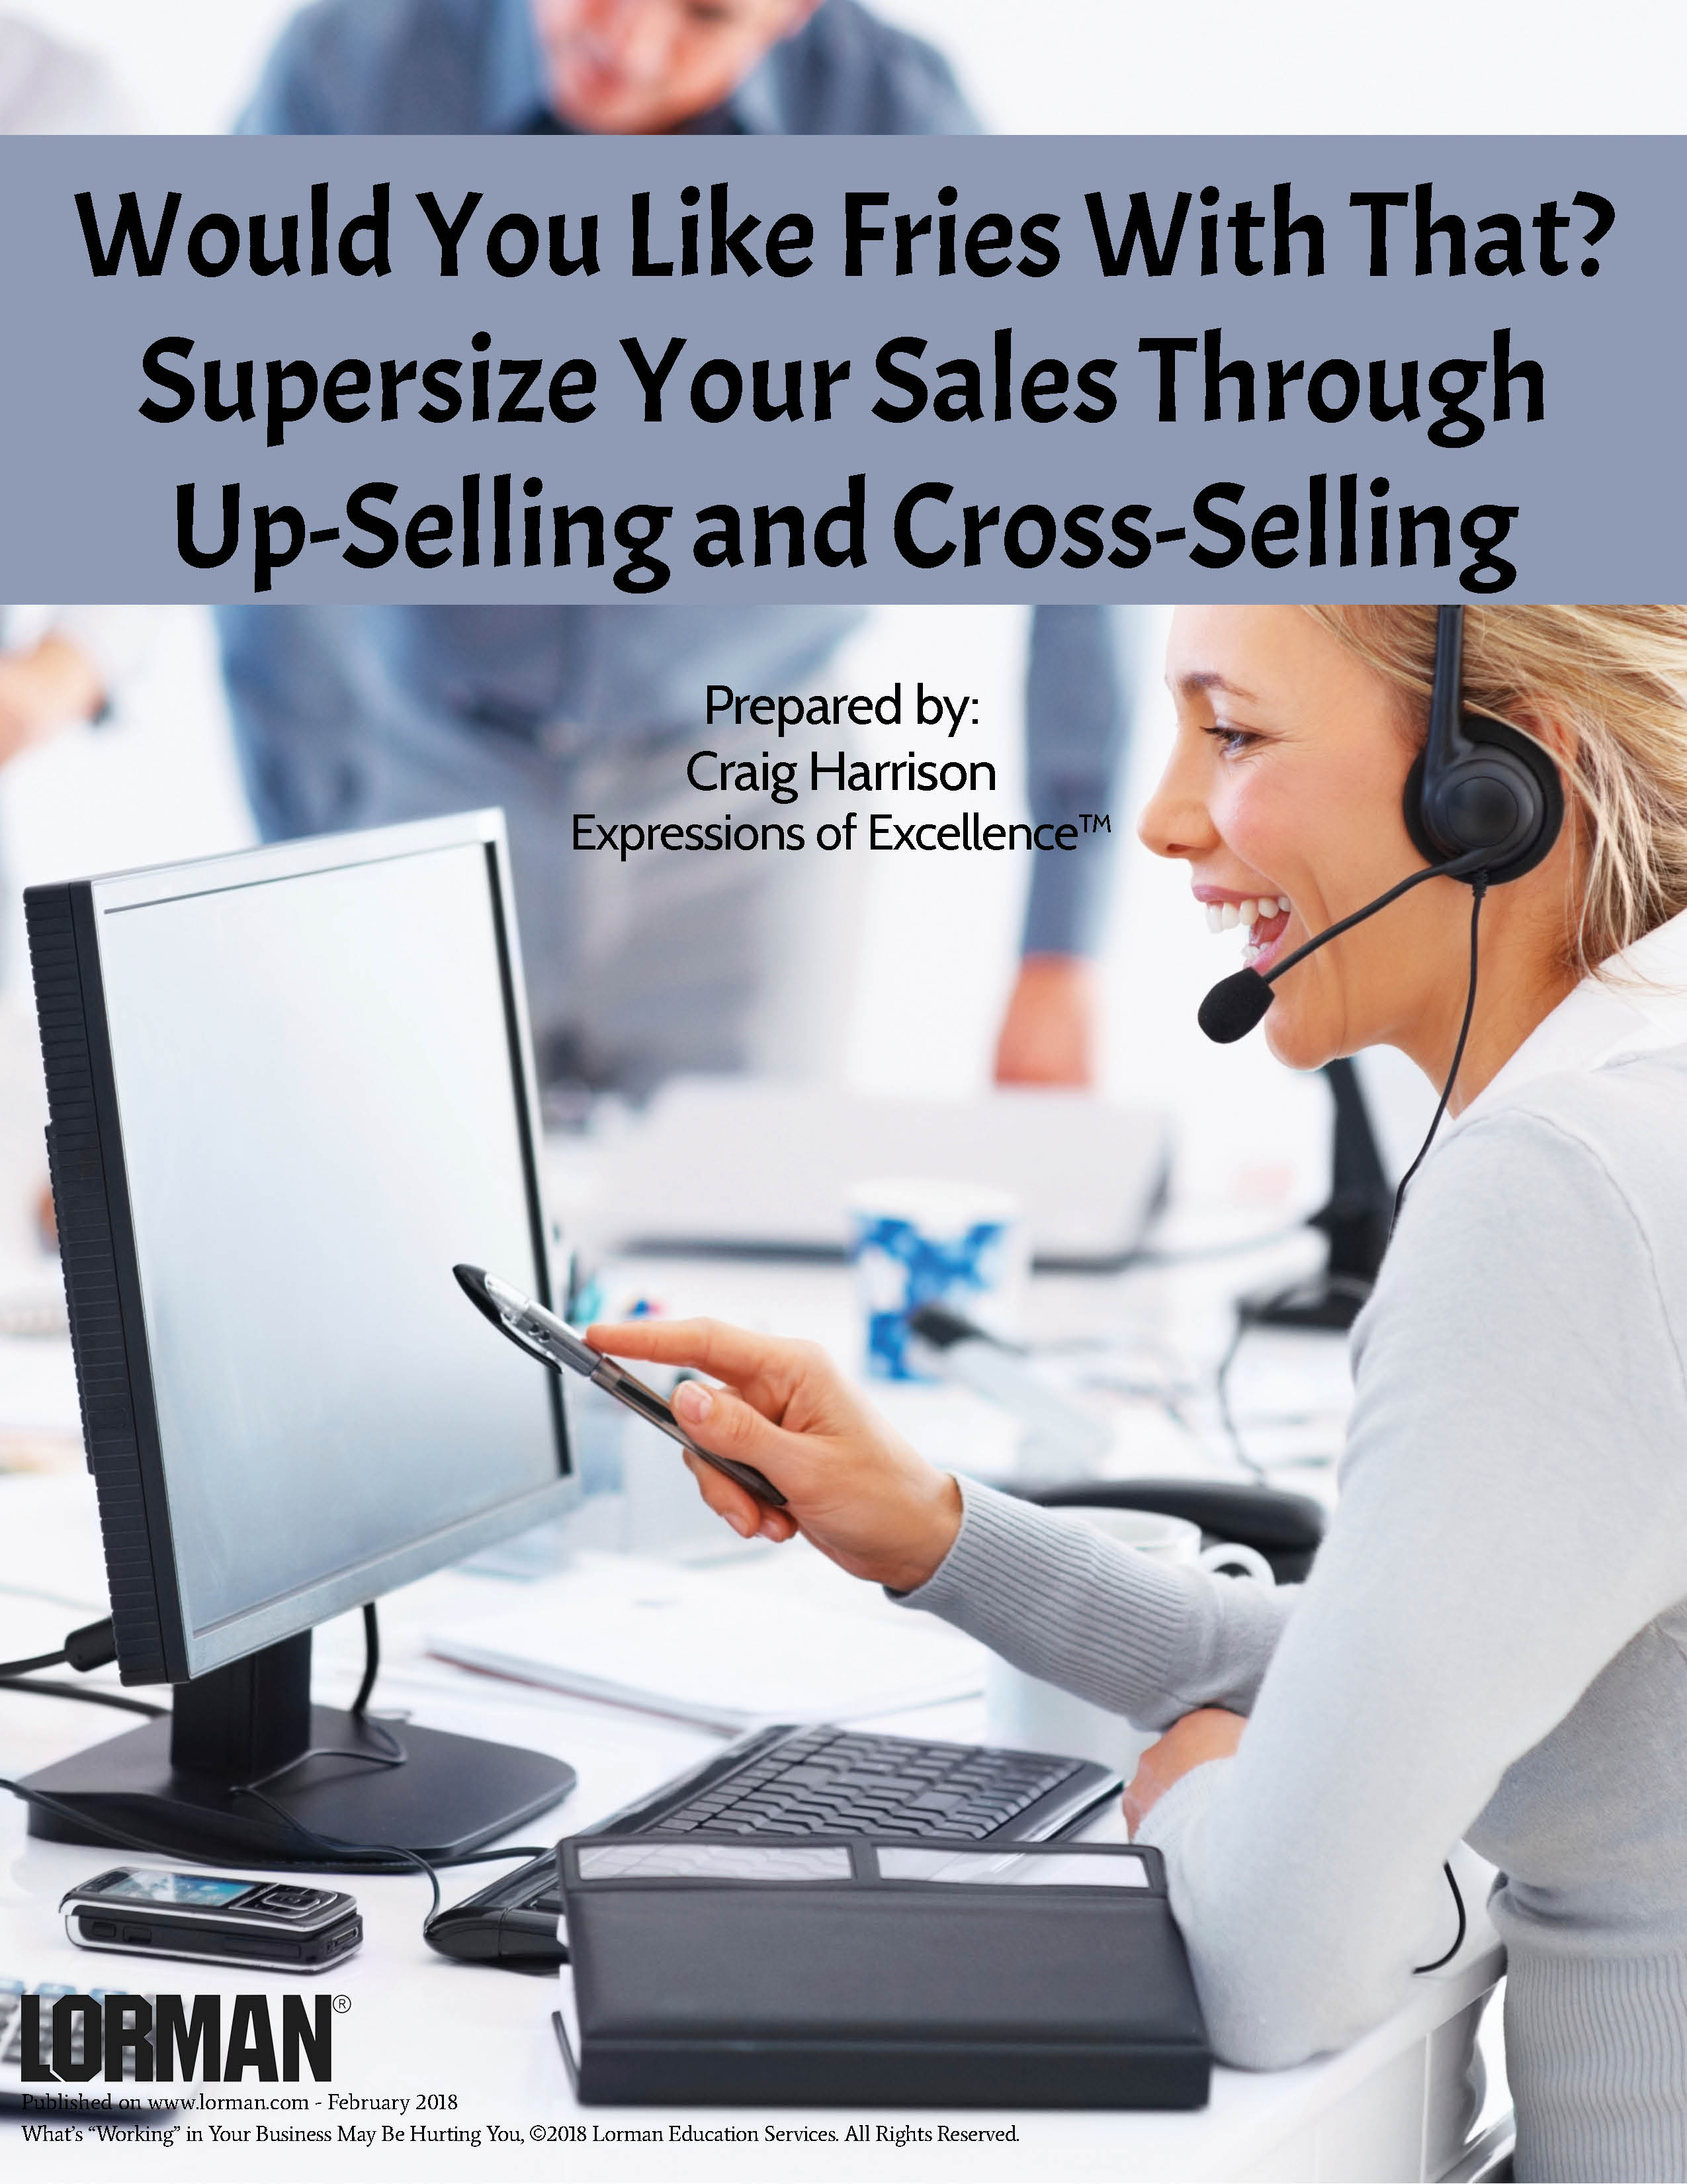 Would You Like Fries With That? Supersize Your Sales Through Up-Selling and Cross-Selling 